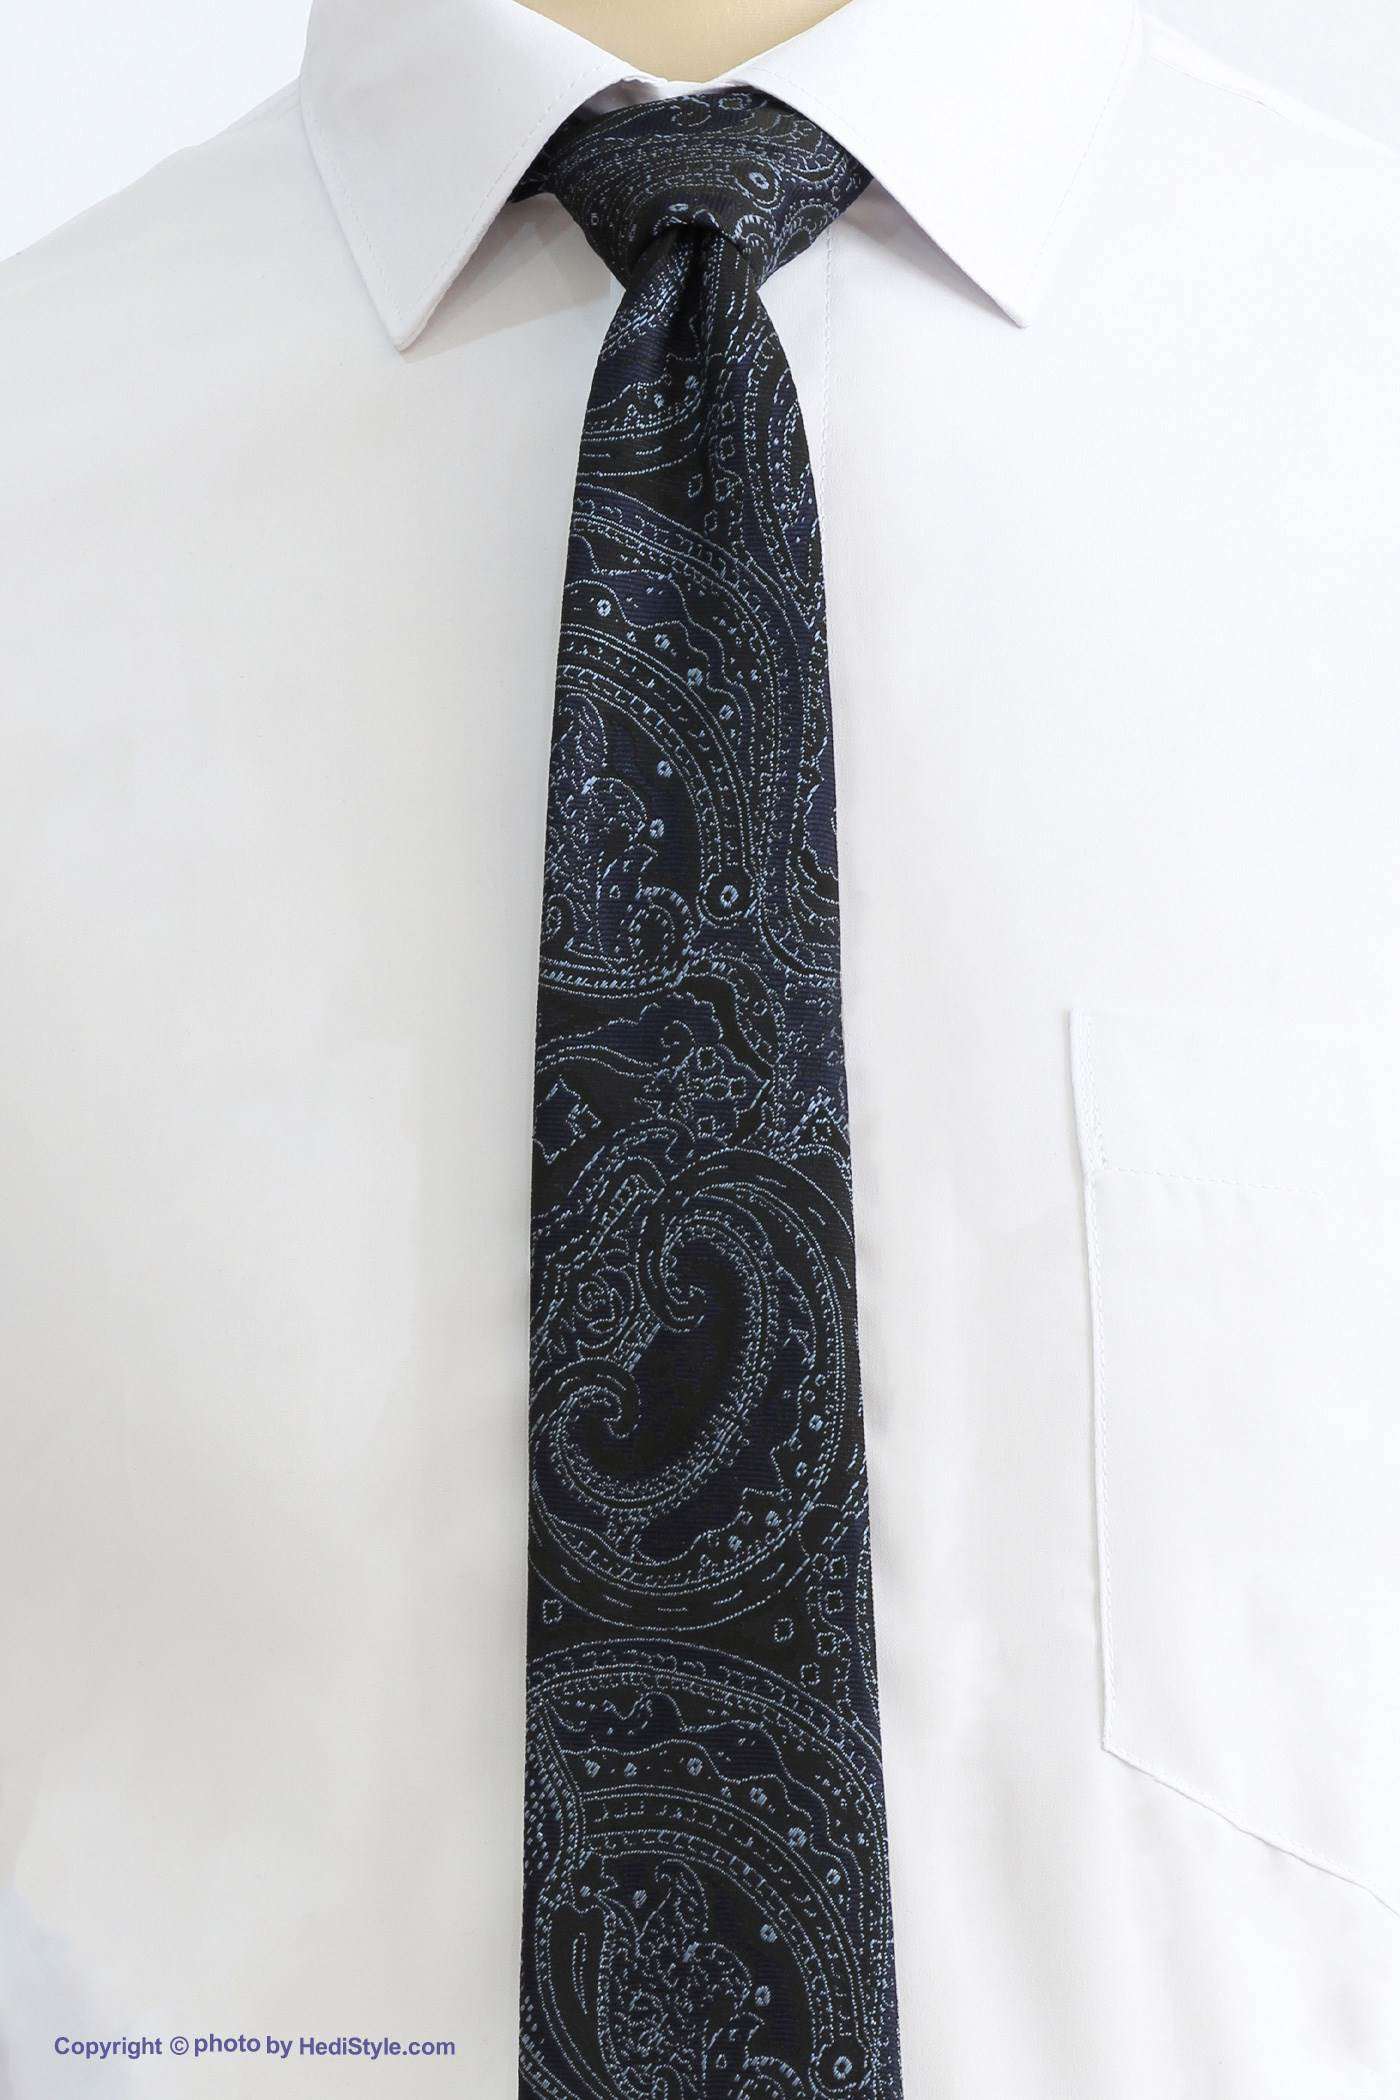 Tie set and skin of the design of the blue navy blue jacket code T01-07-1208